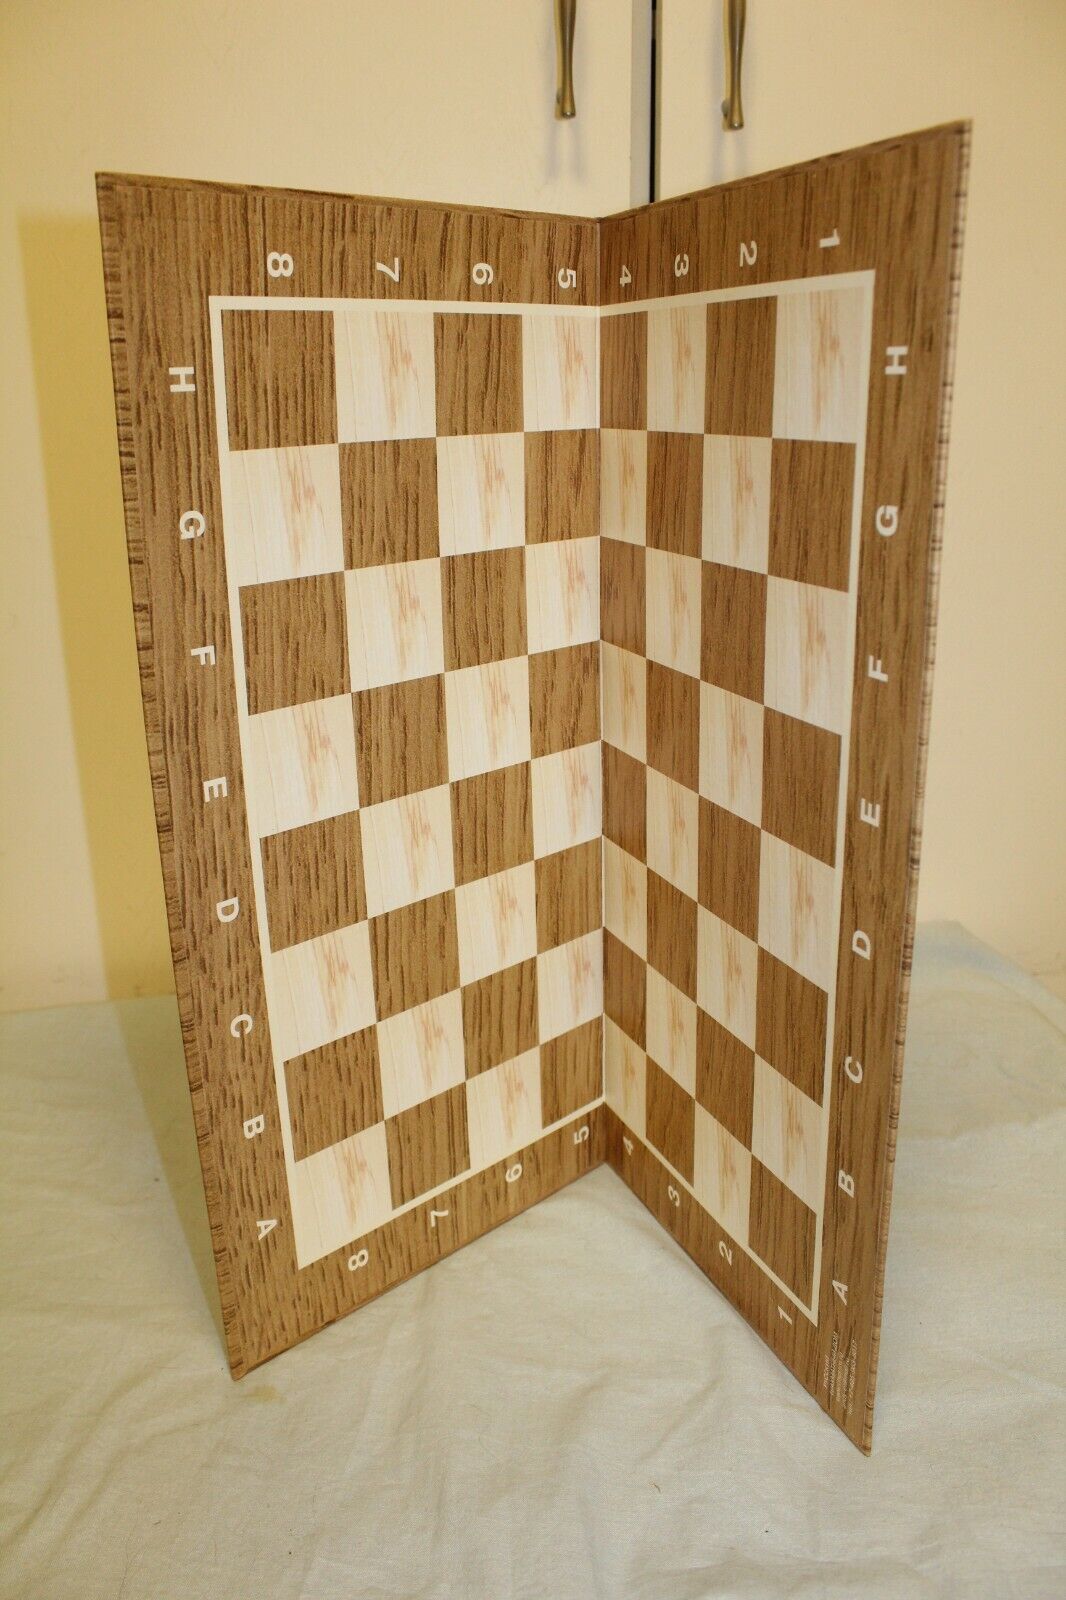 11228.Chess Tournament Cardboard Board with International Blitz Game Rules (40x40 cm)